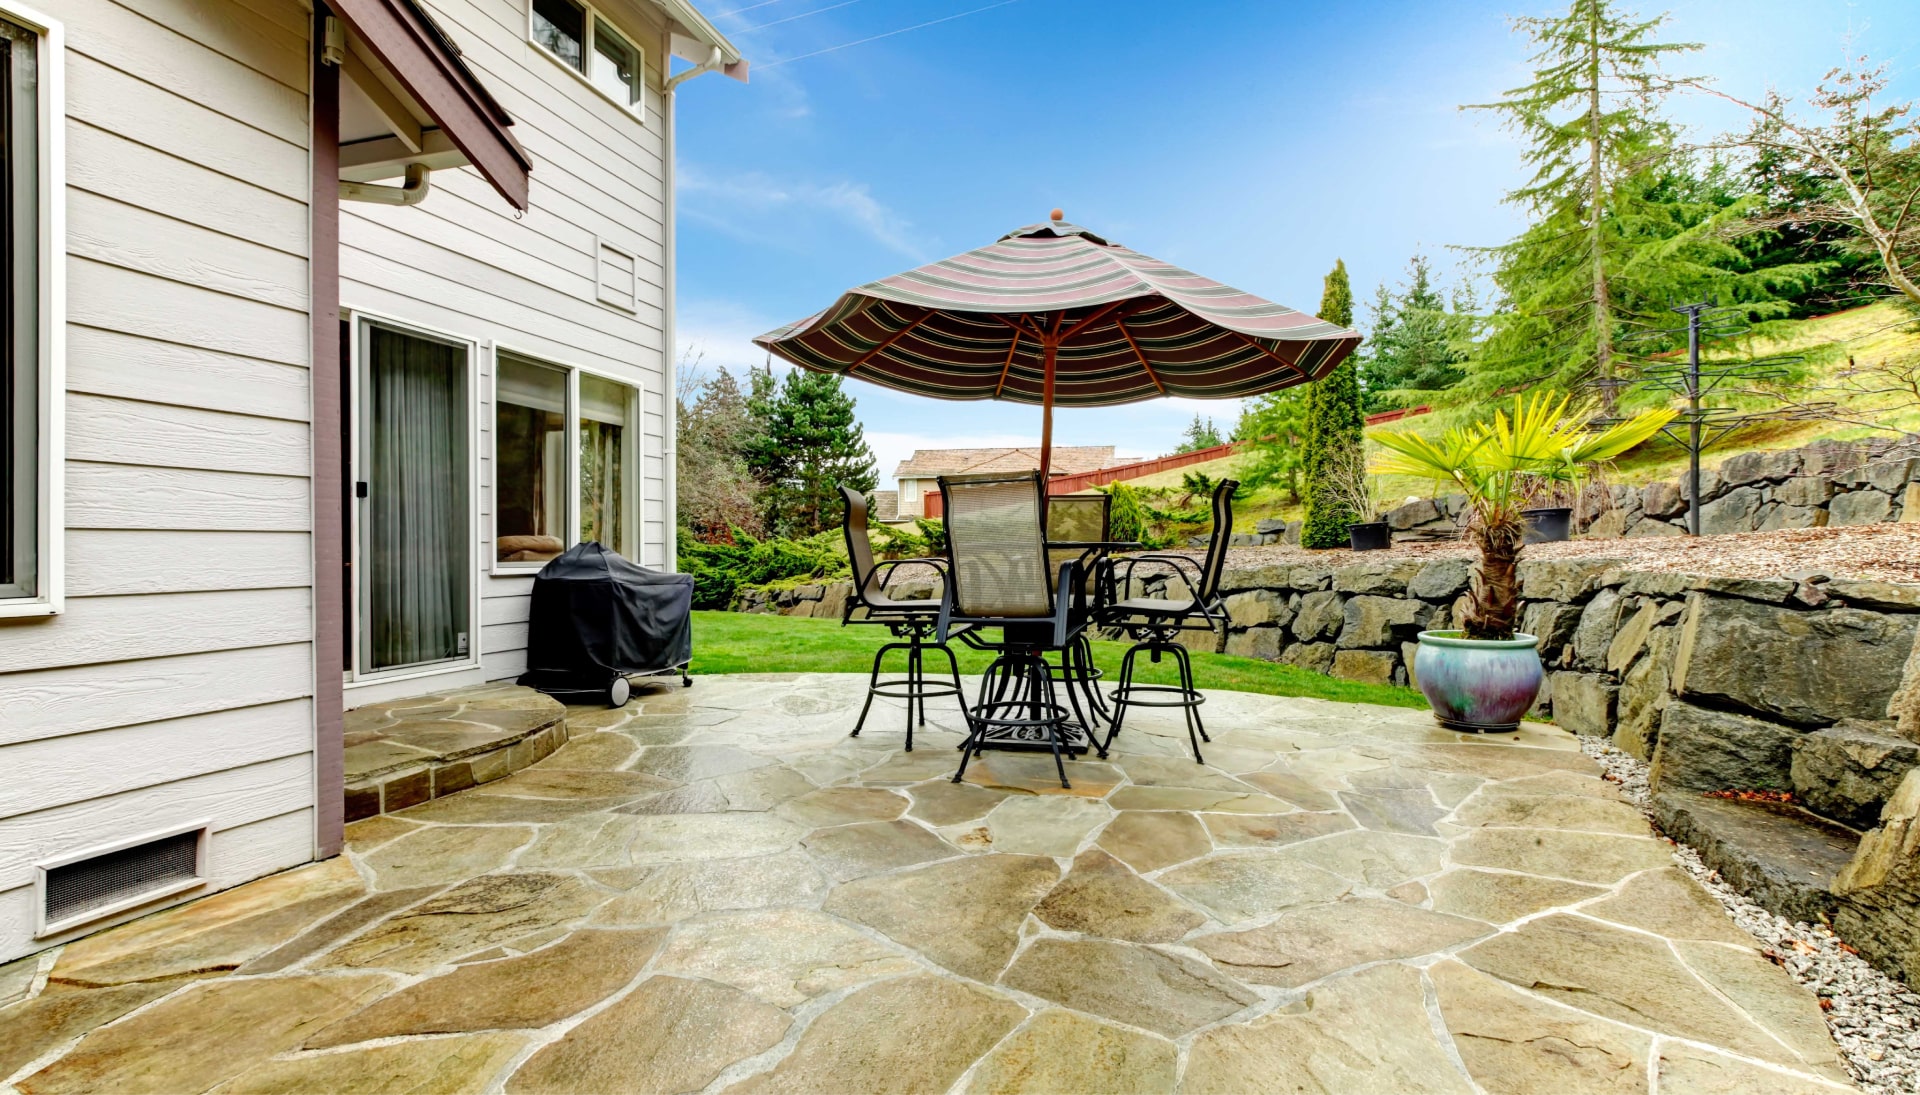 Beautifully Textured and Patterned Concrete Patios in Tacoma, Washington area!